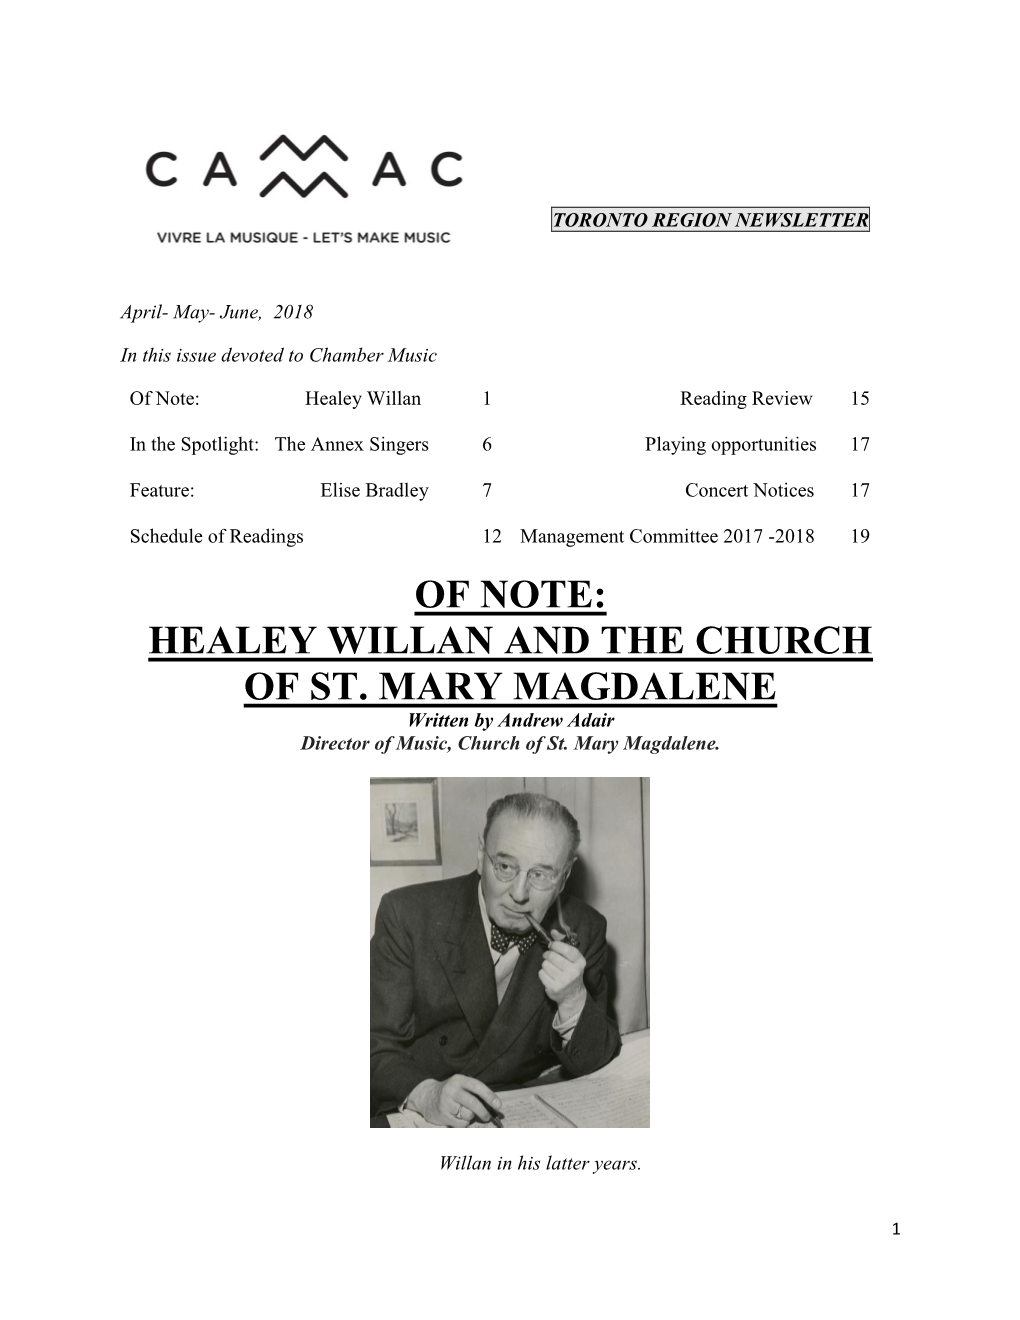 HEALEY WILLAN and the CHURCH of ST. MARY MAGDALENE Written by Andrew Adair Director of Music, Church of St